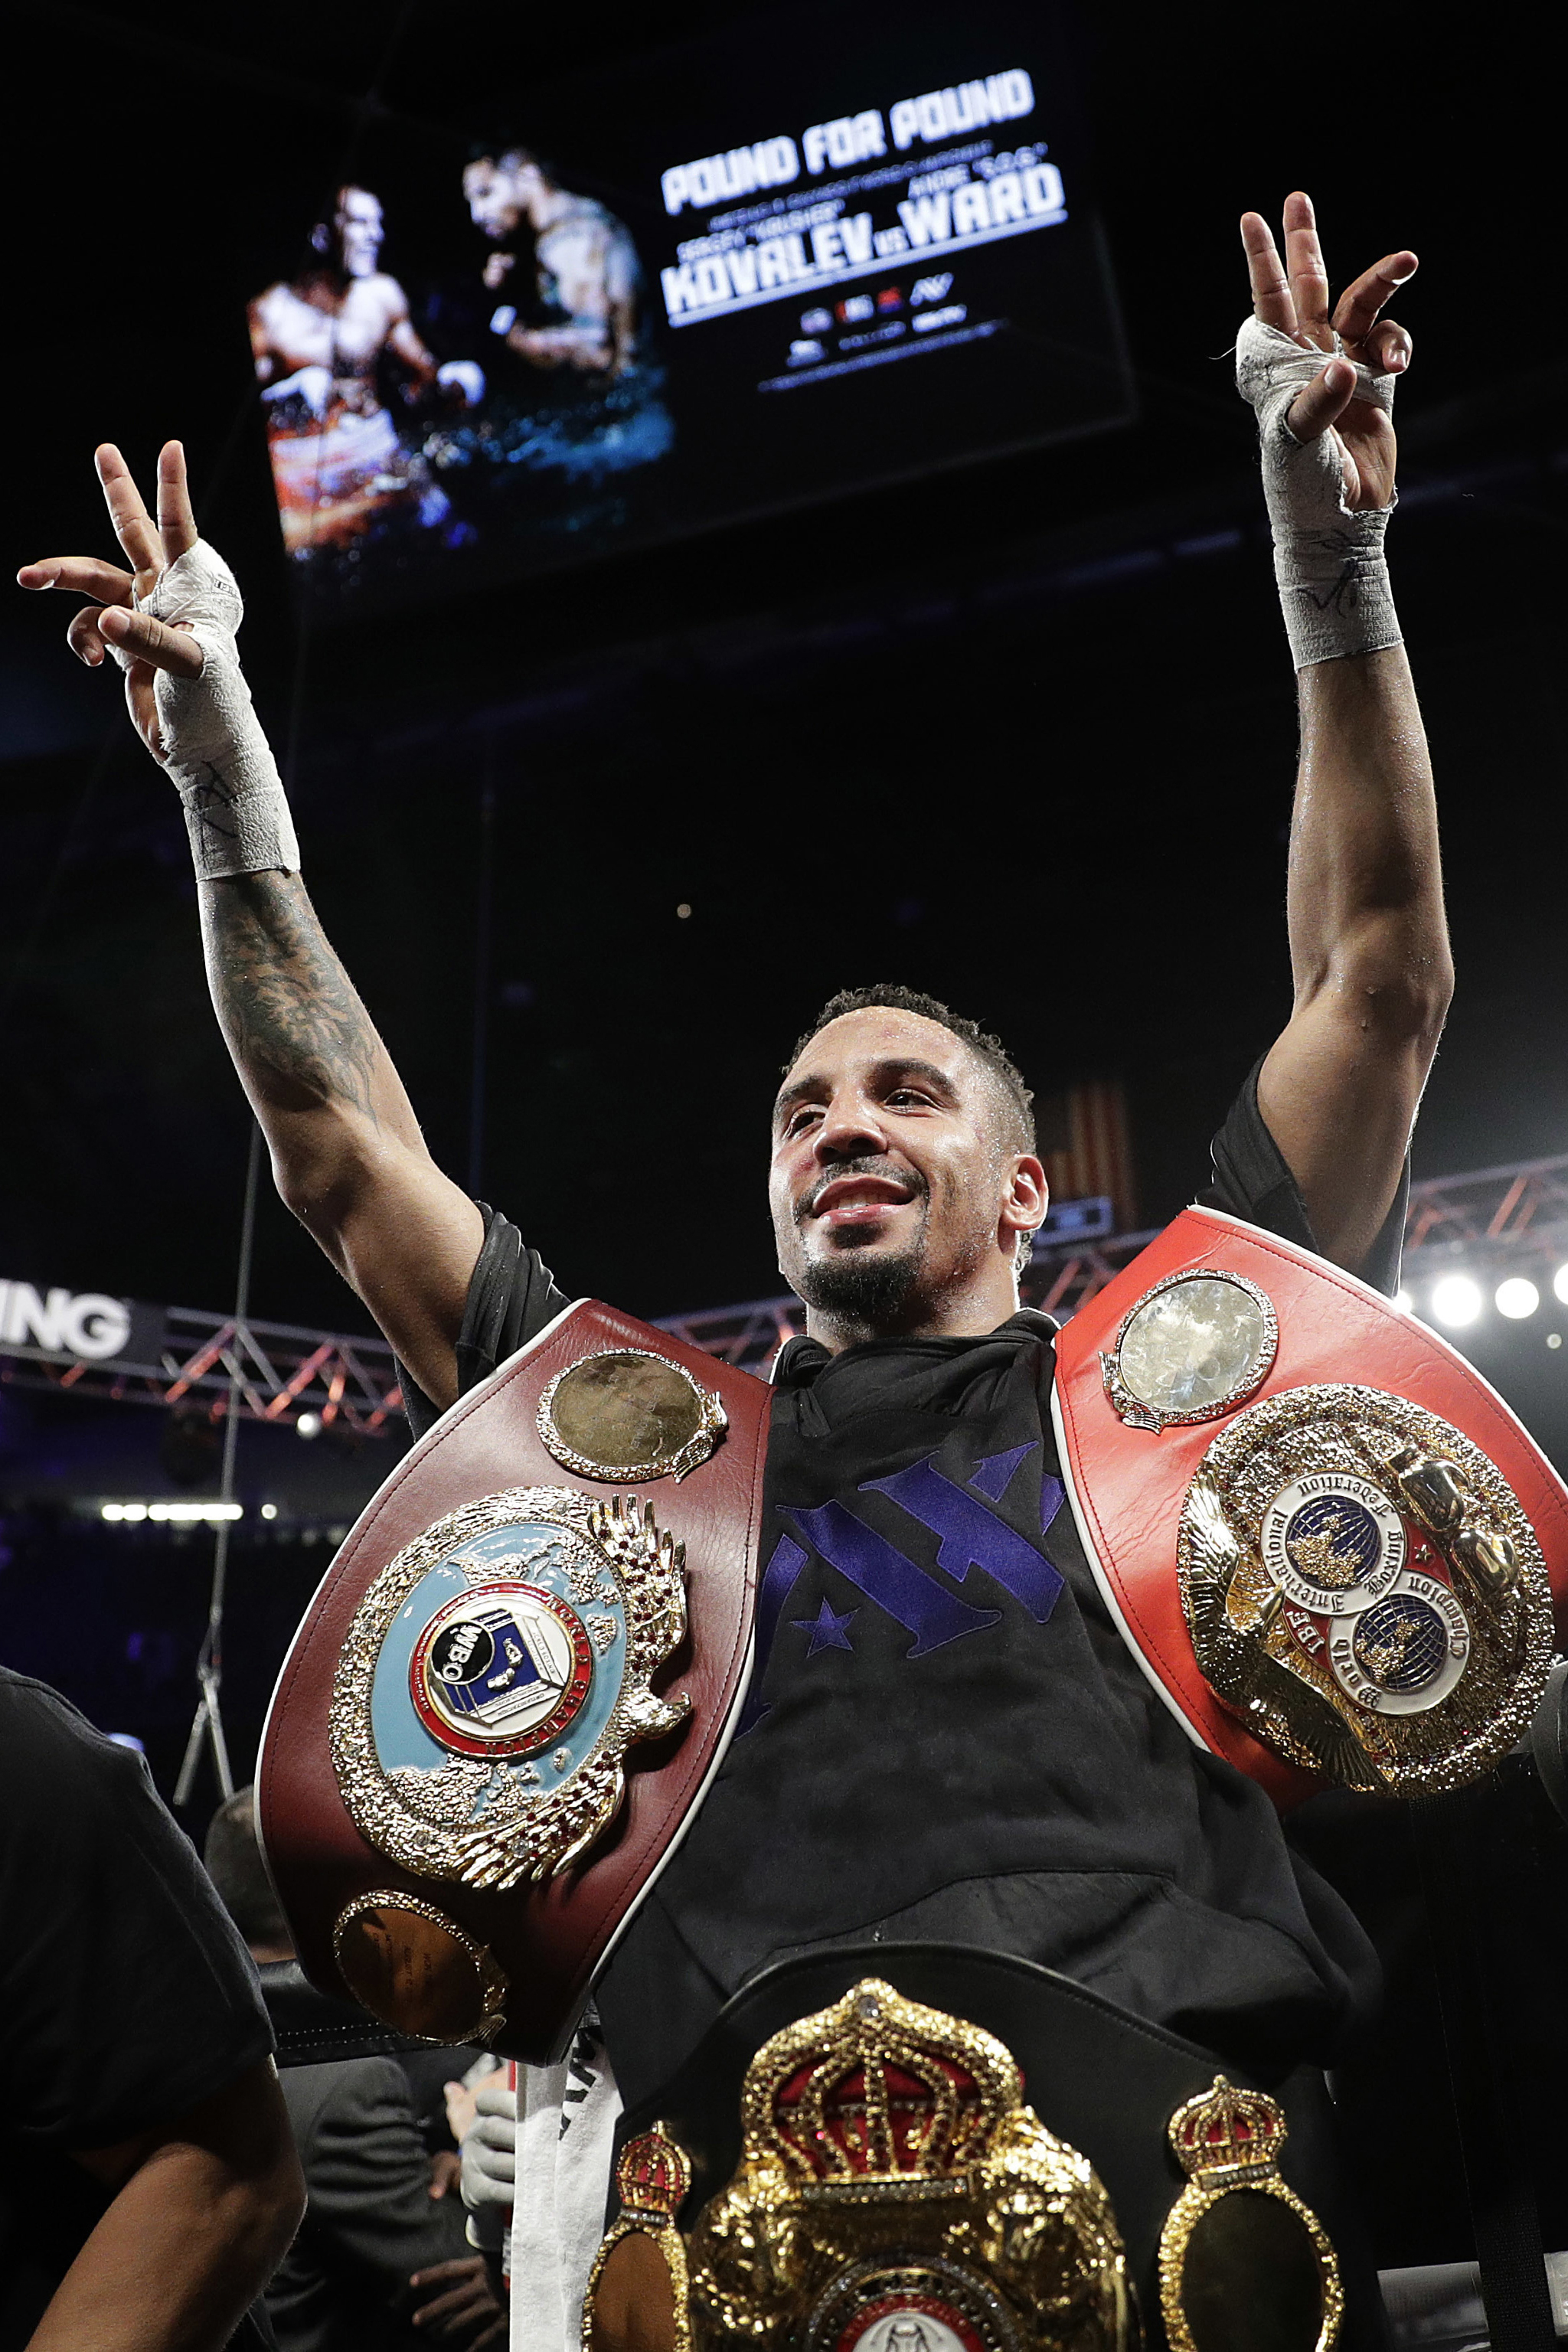 Andre Ward celebrates his victory over Sergey Kovalev of Russia in a light heavyweight boxing match.